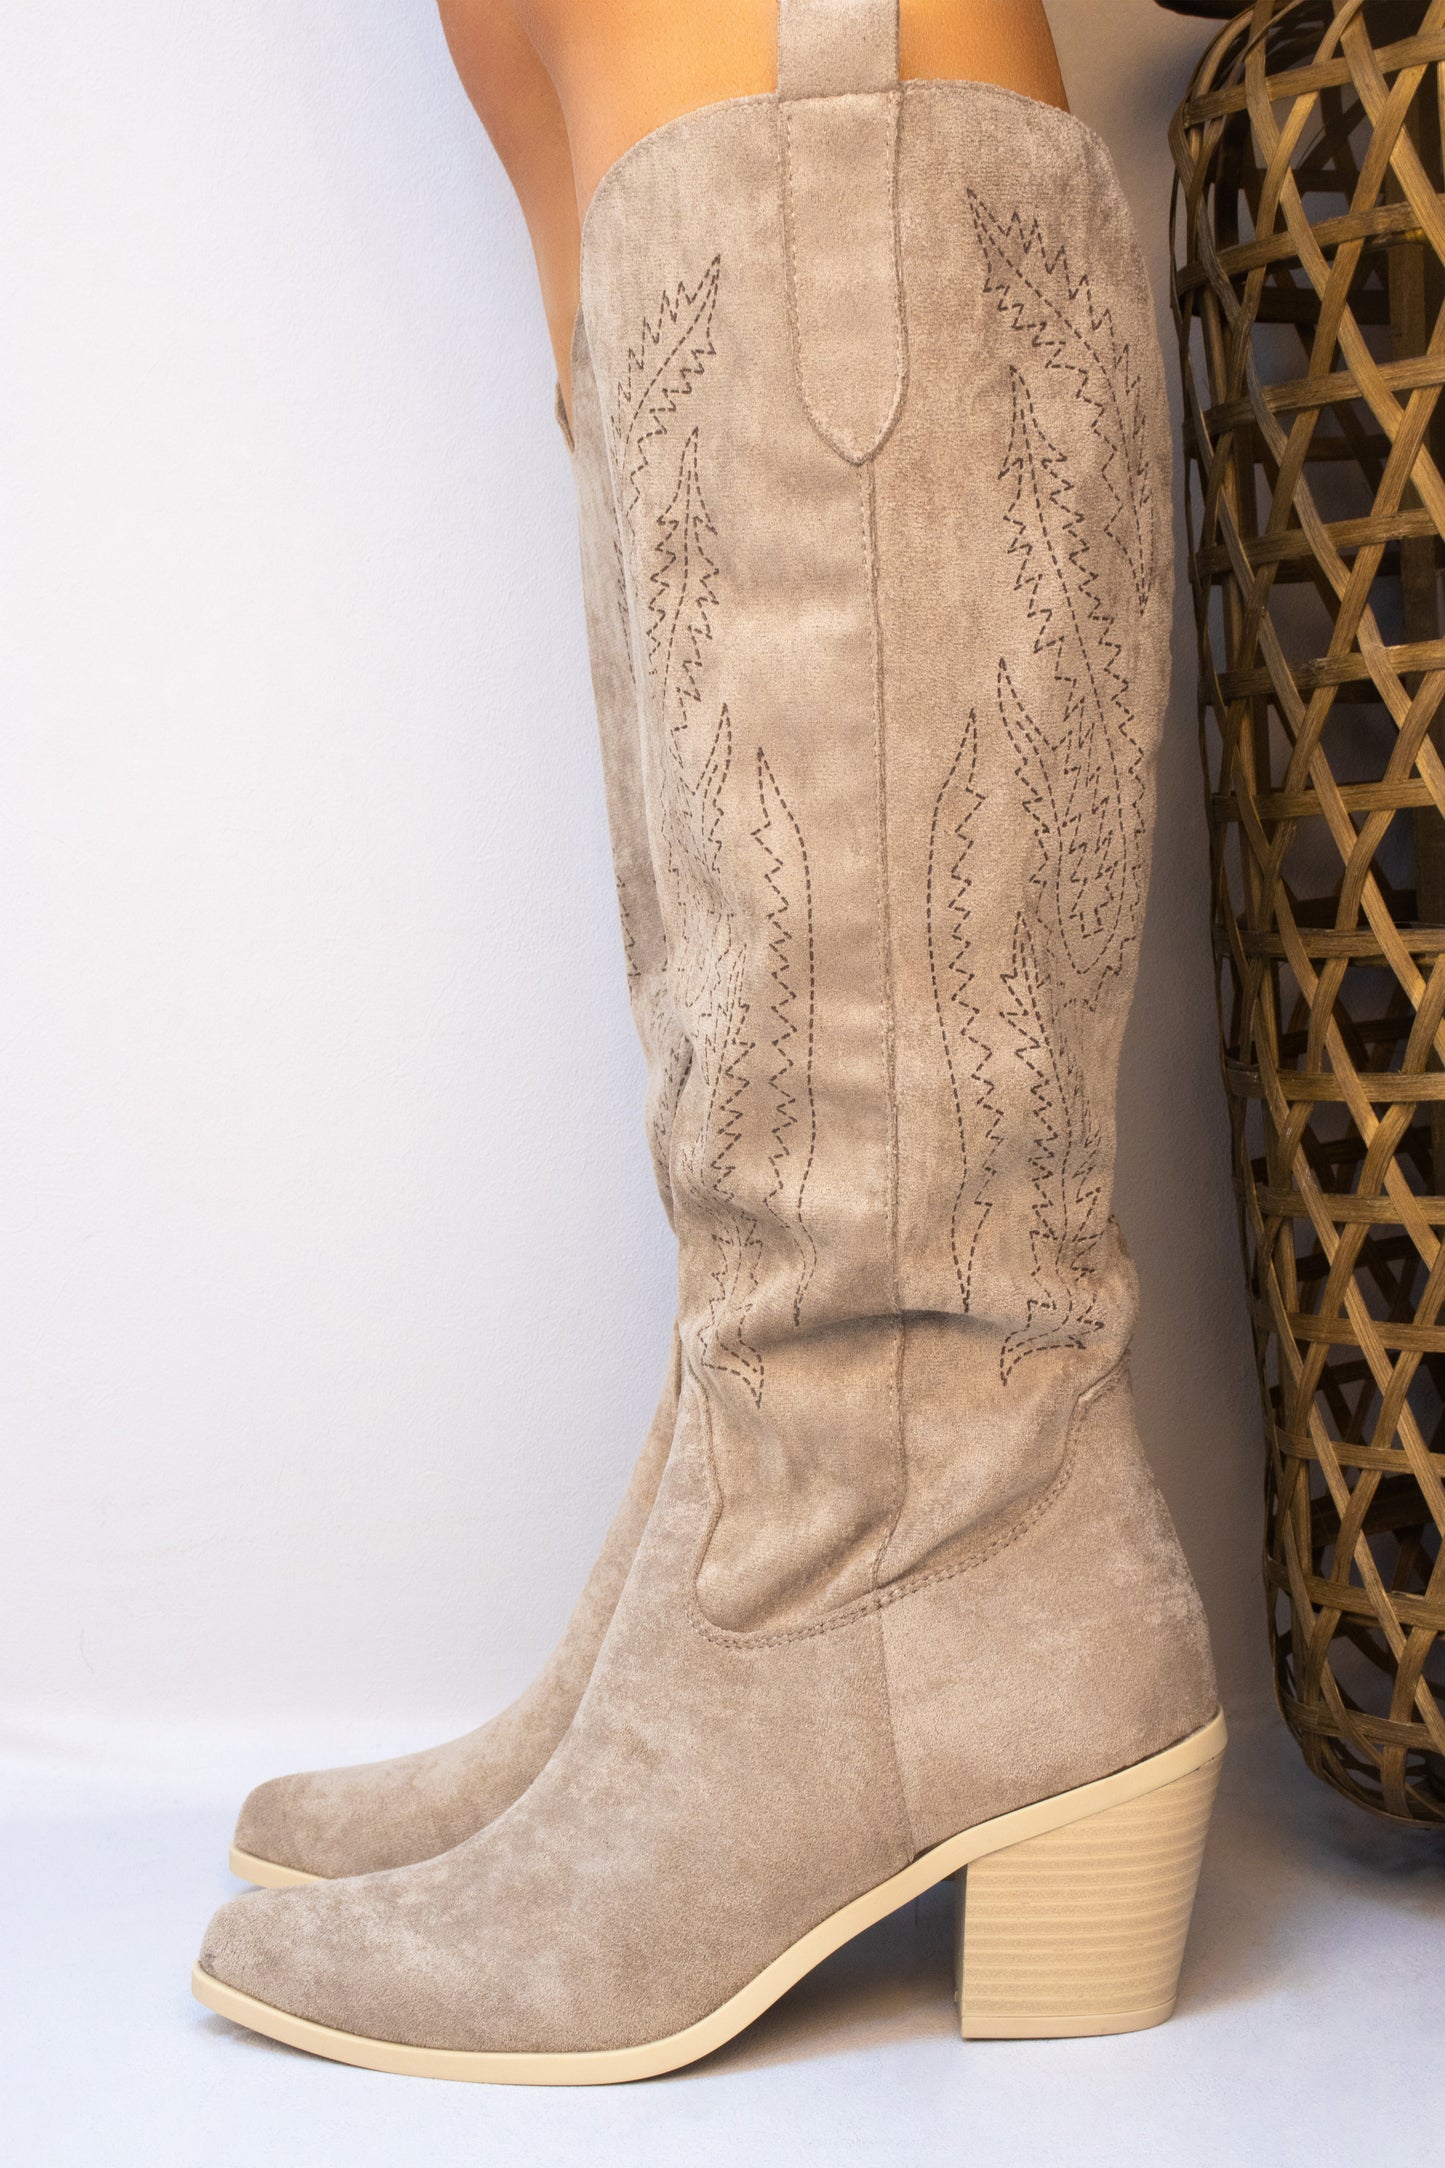 Khaki Faux Suede Western Style Knee High Cowboy Boot